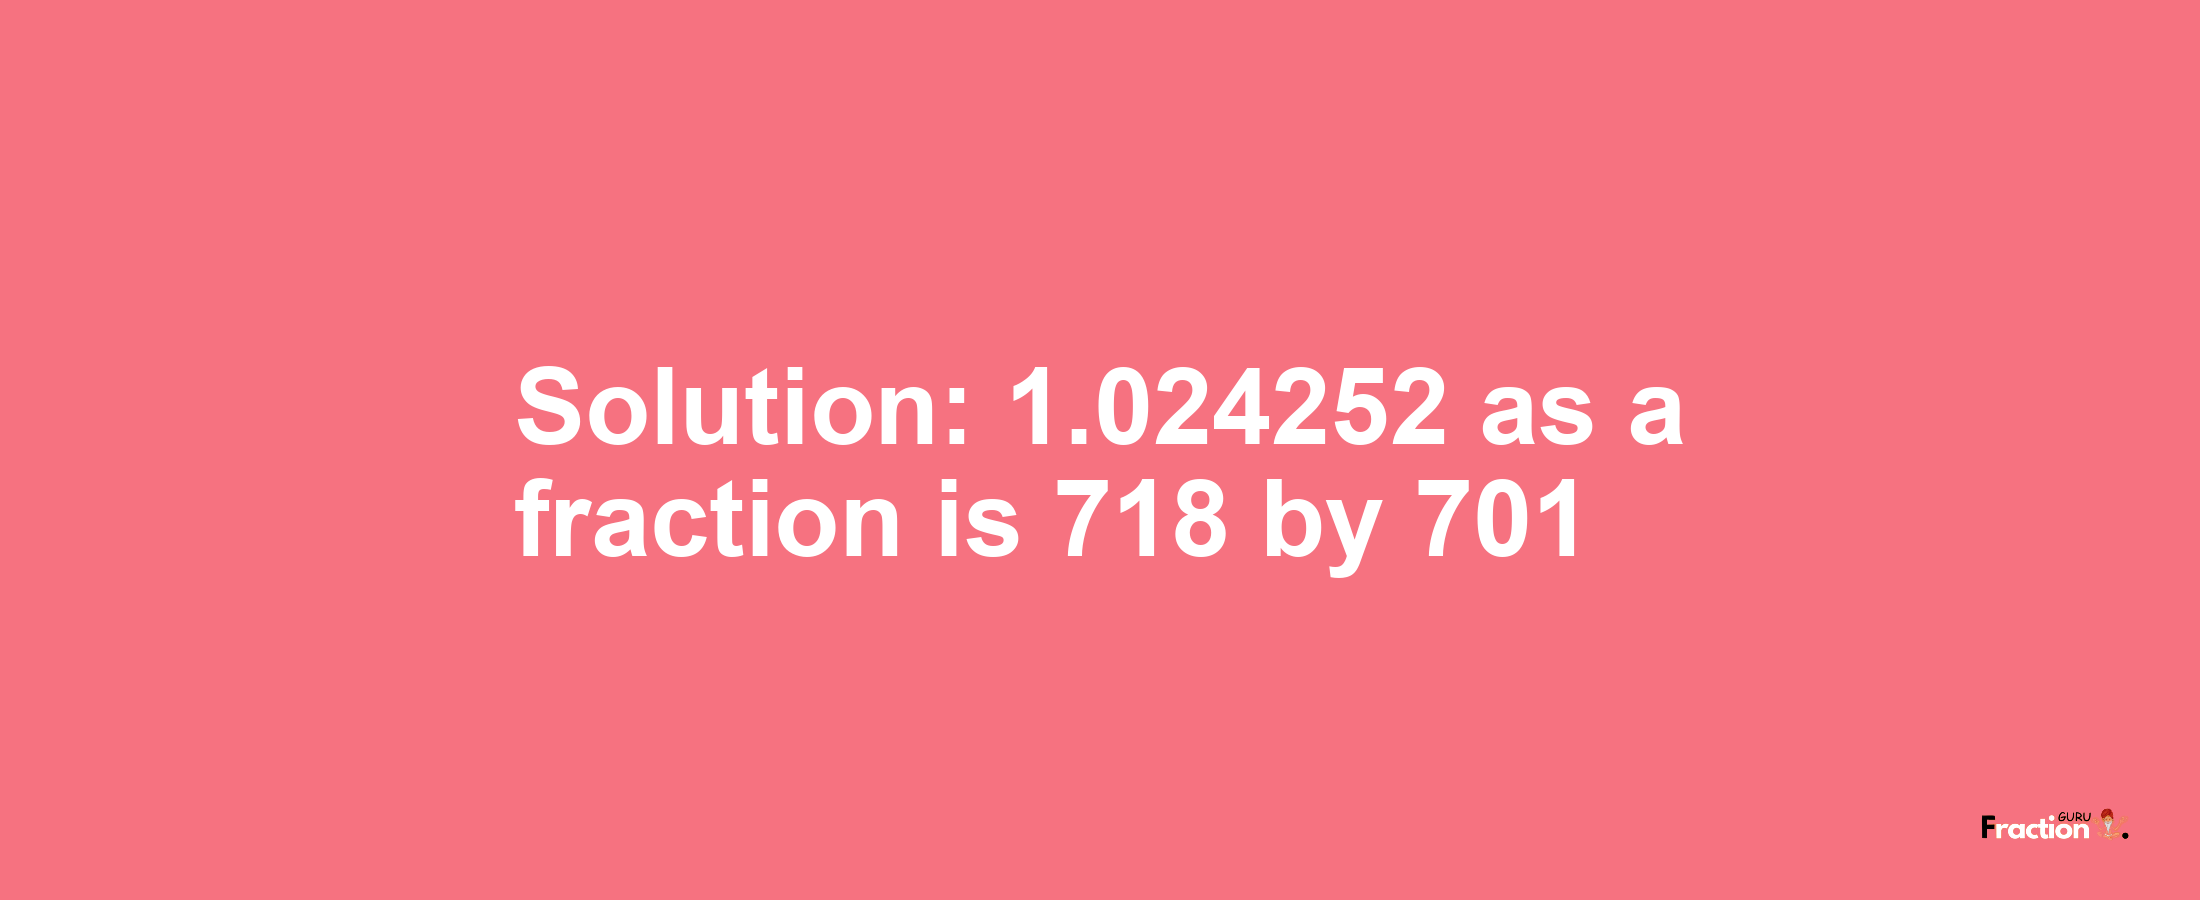 Solution:1.024252 as a fraction is 718/701